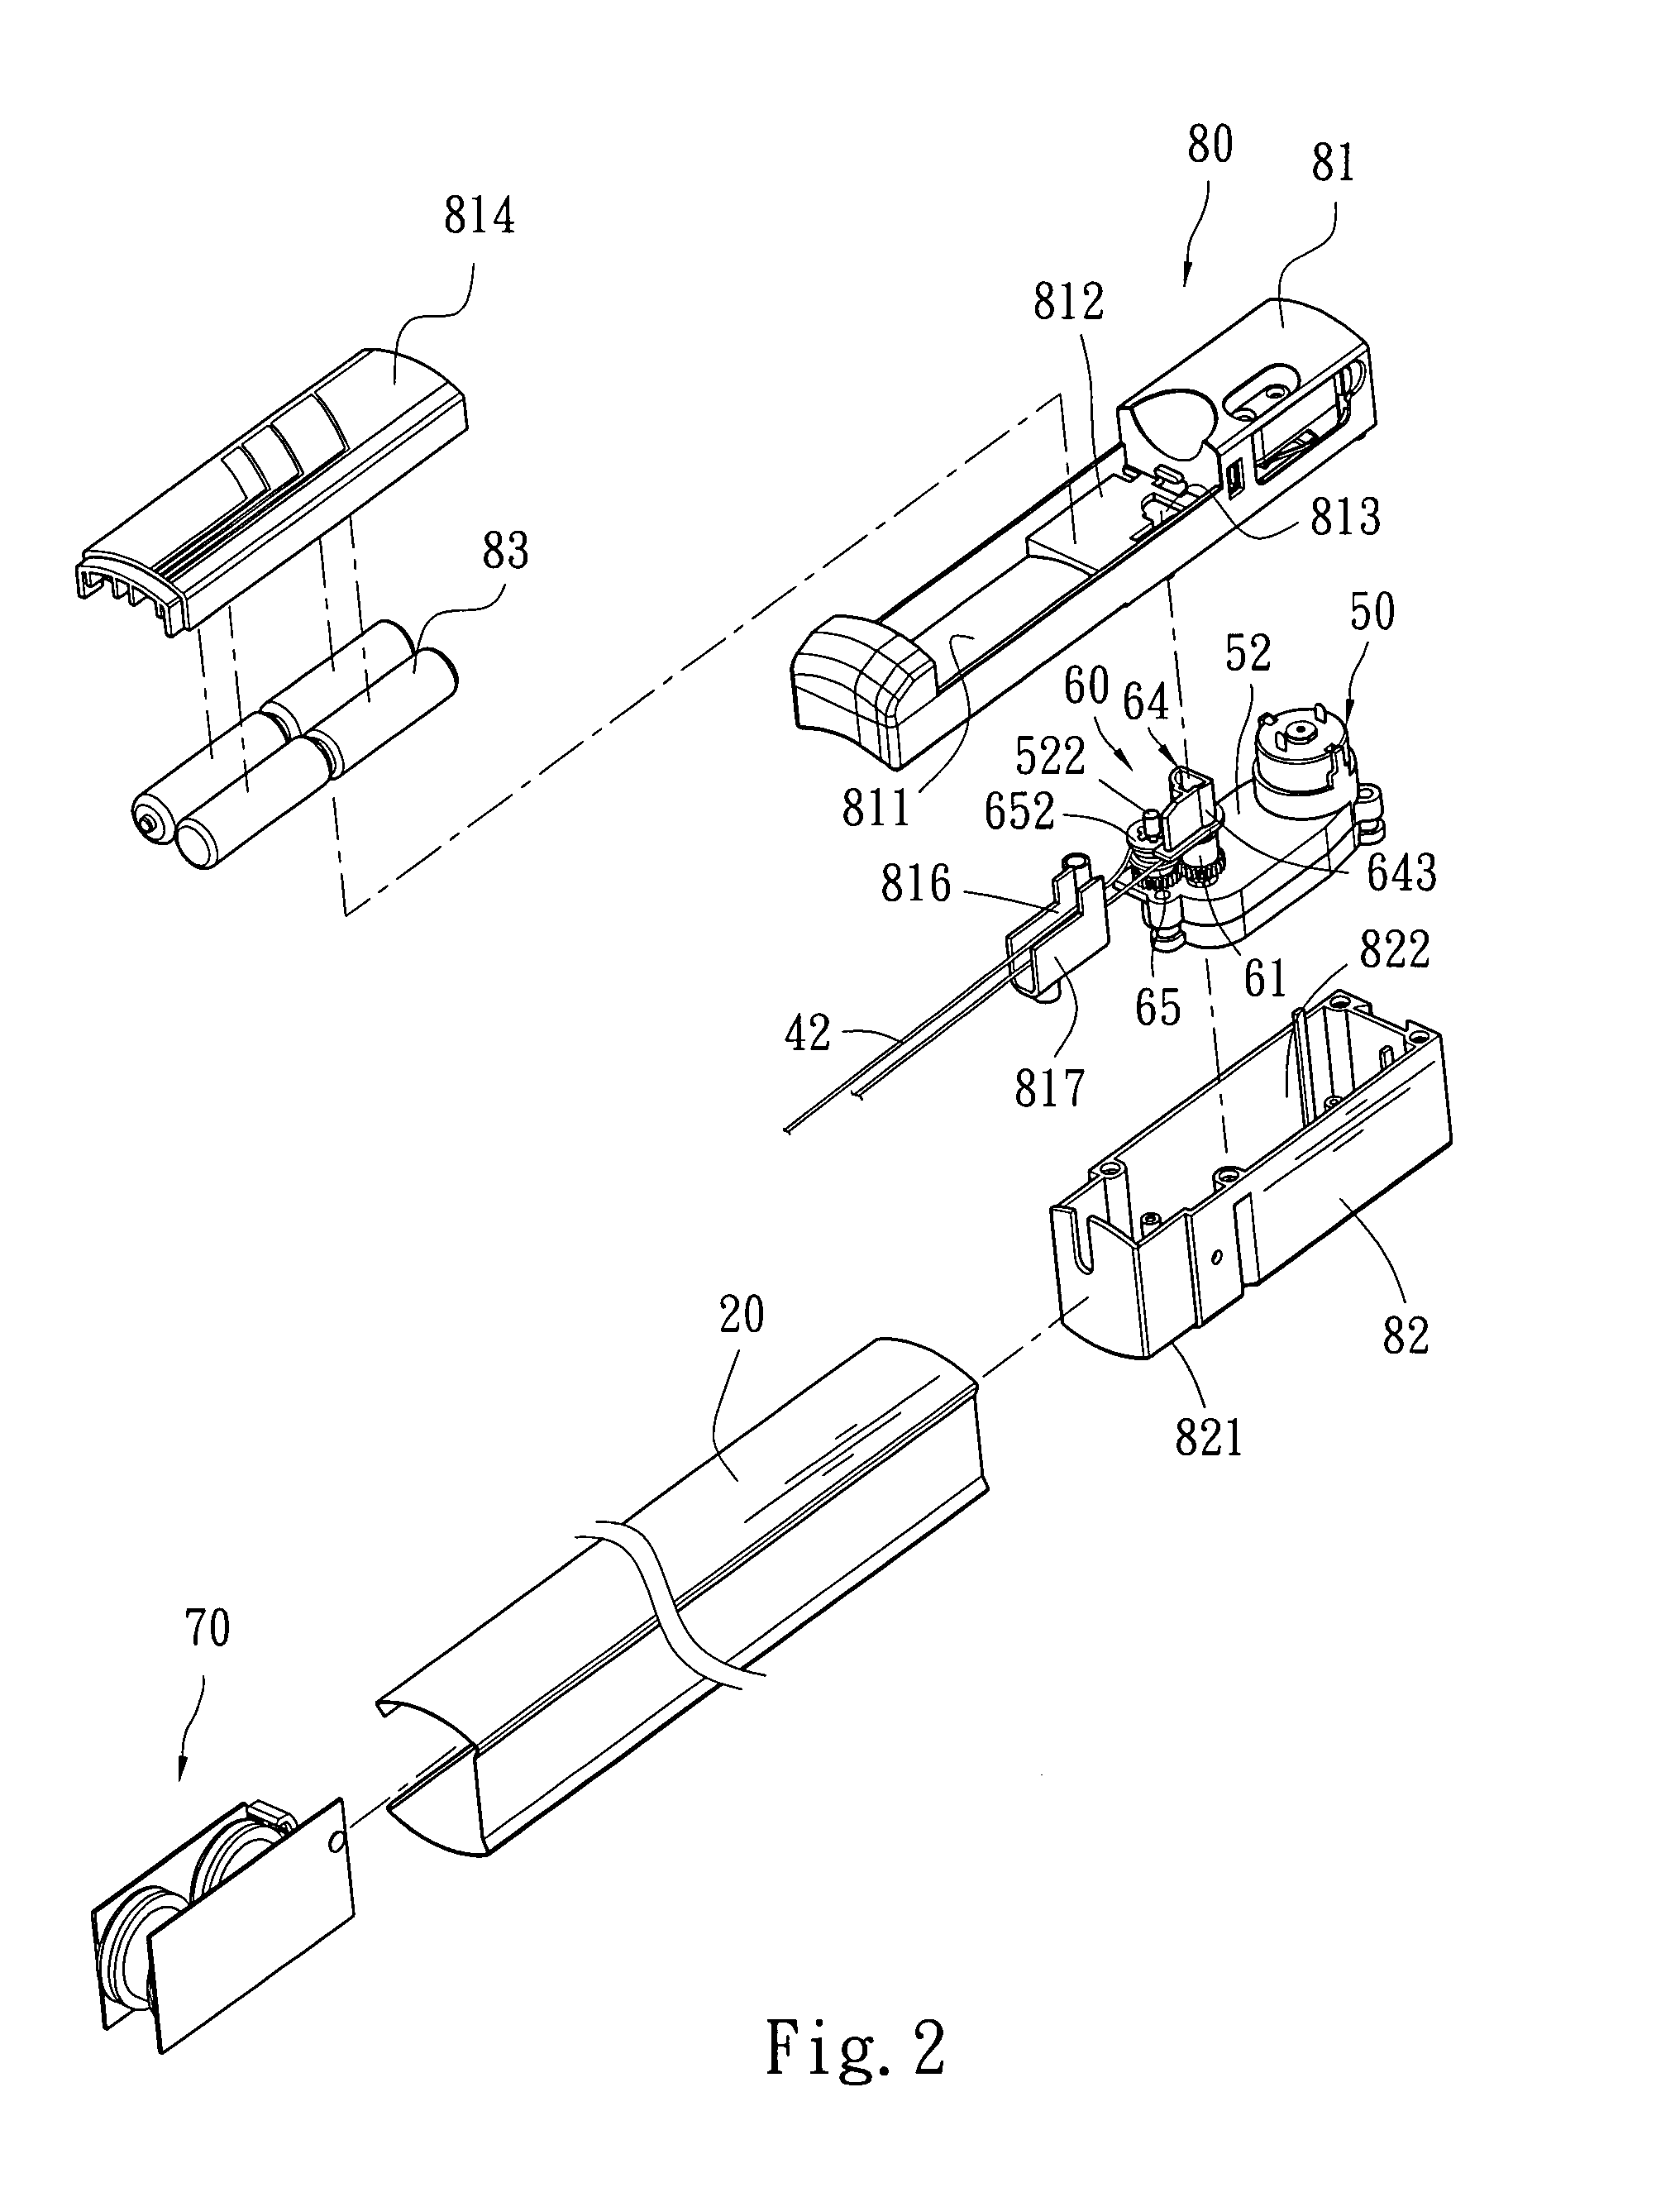 Window covering switchable to manual operation and electrical operation and a clutch thereof